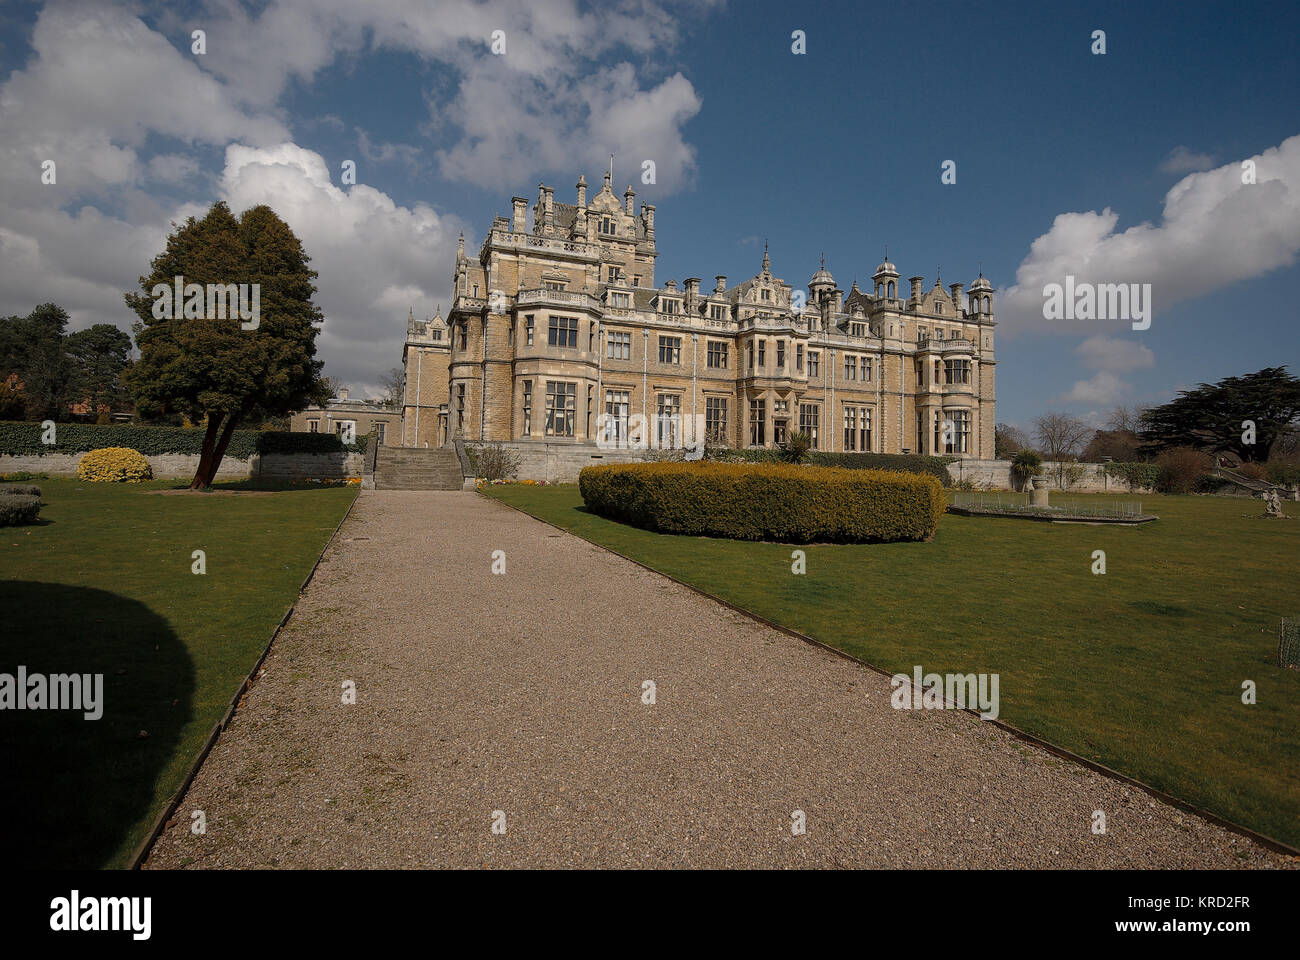 View of Thoresby Hall, Nottinghamshire, built 1868-1874.  It became a hotel in 2000.      Date: circa 2004 Stock Photo